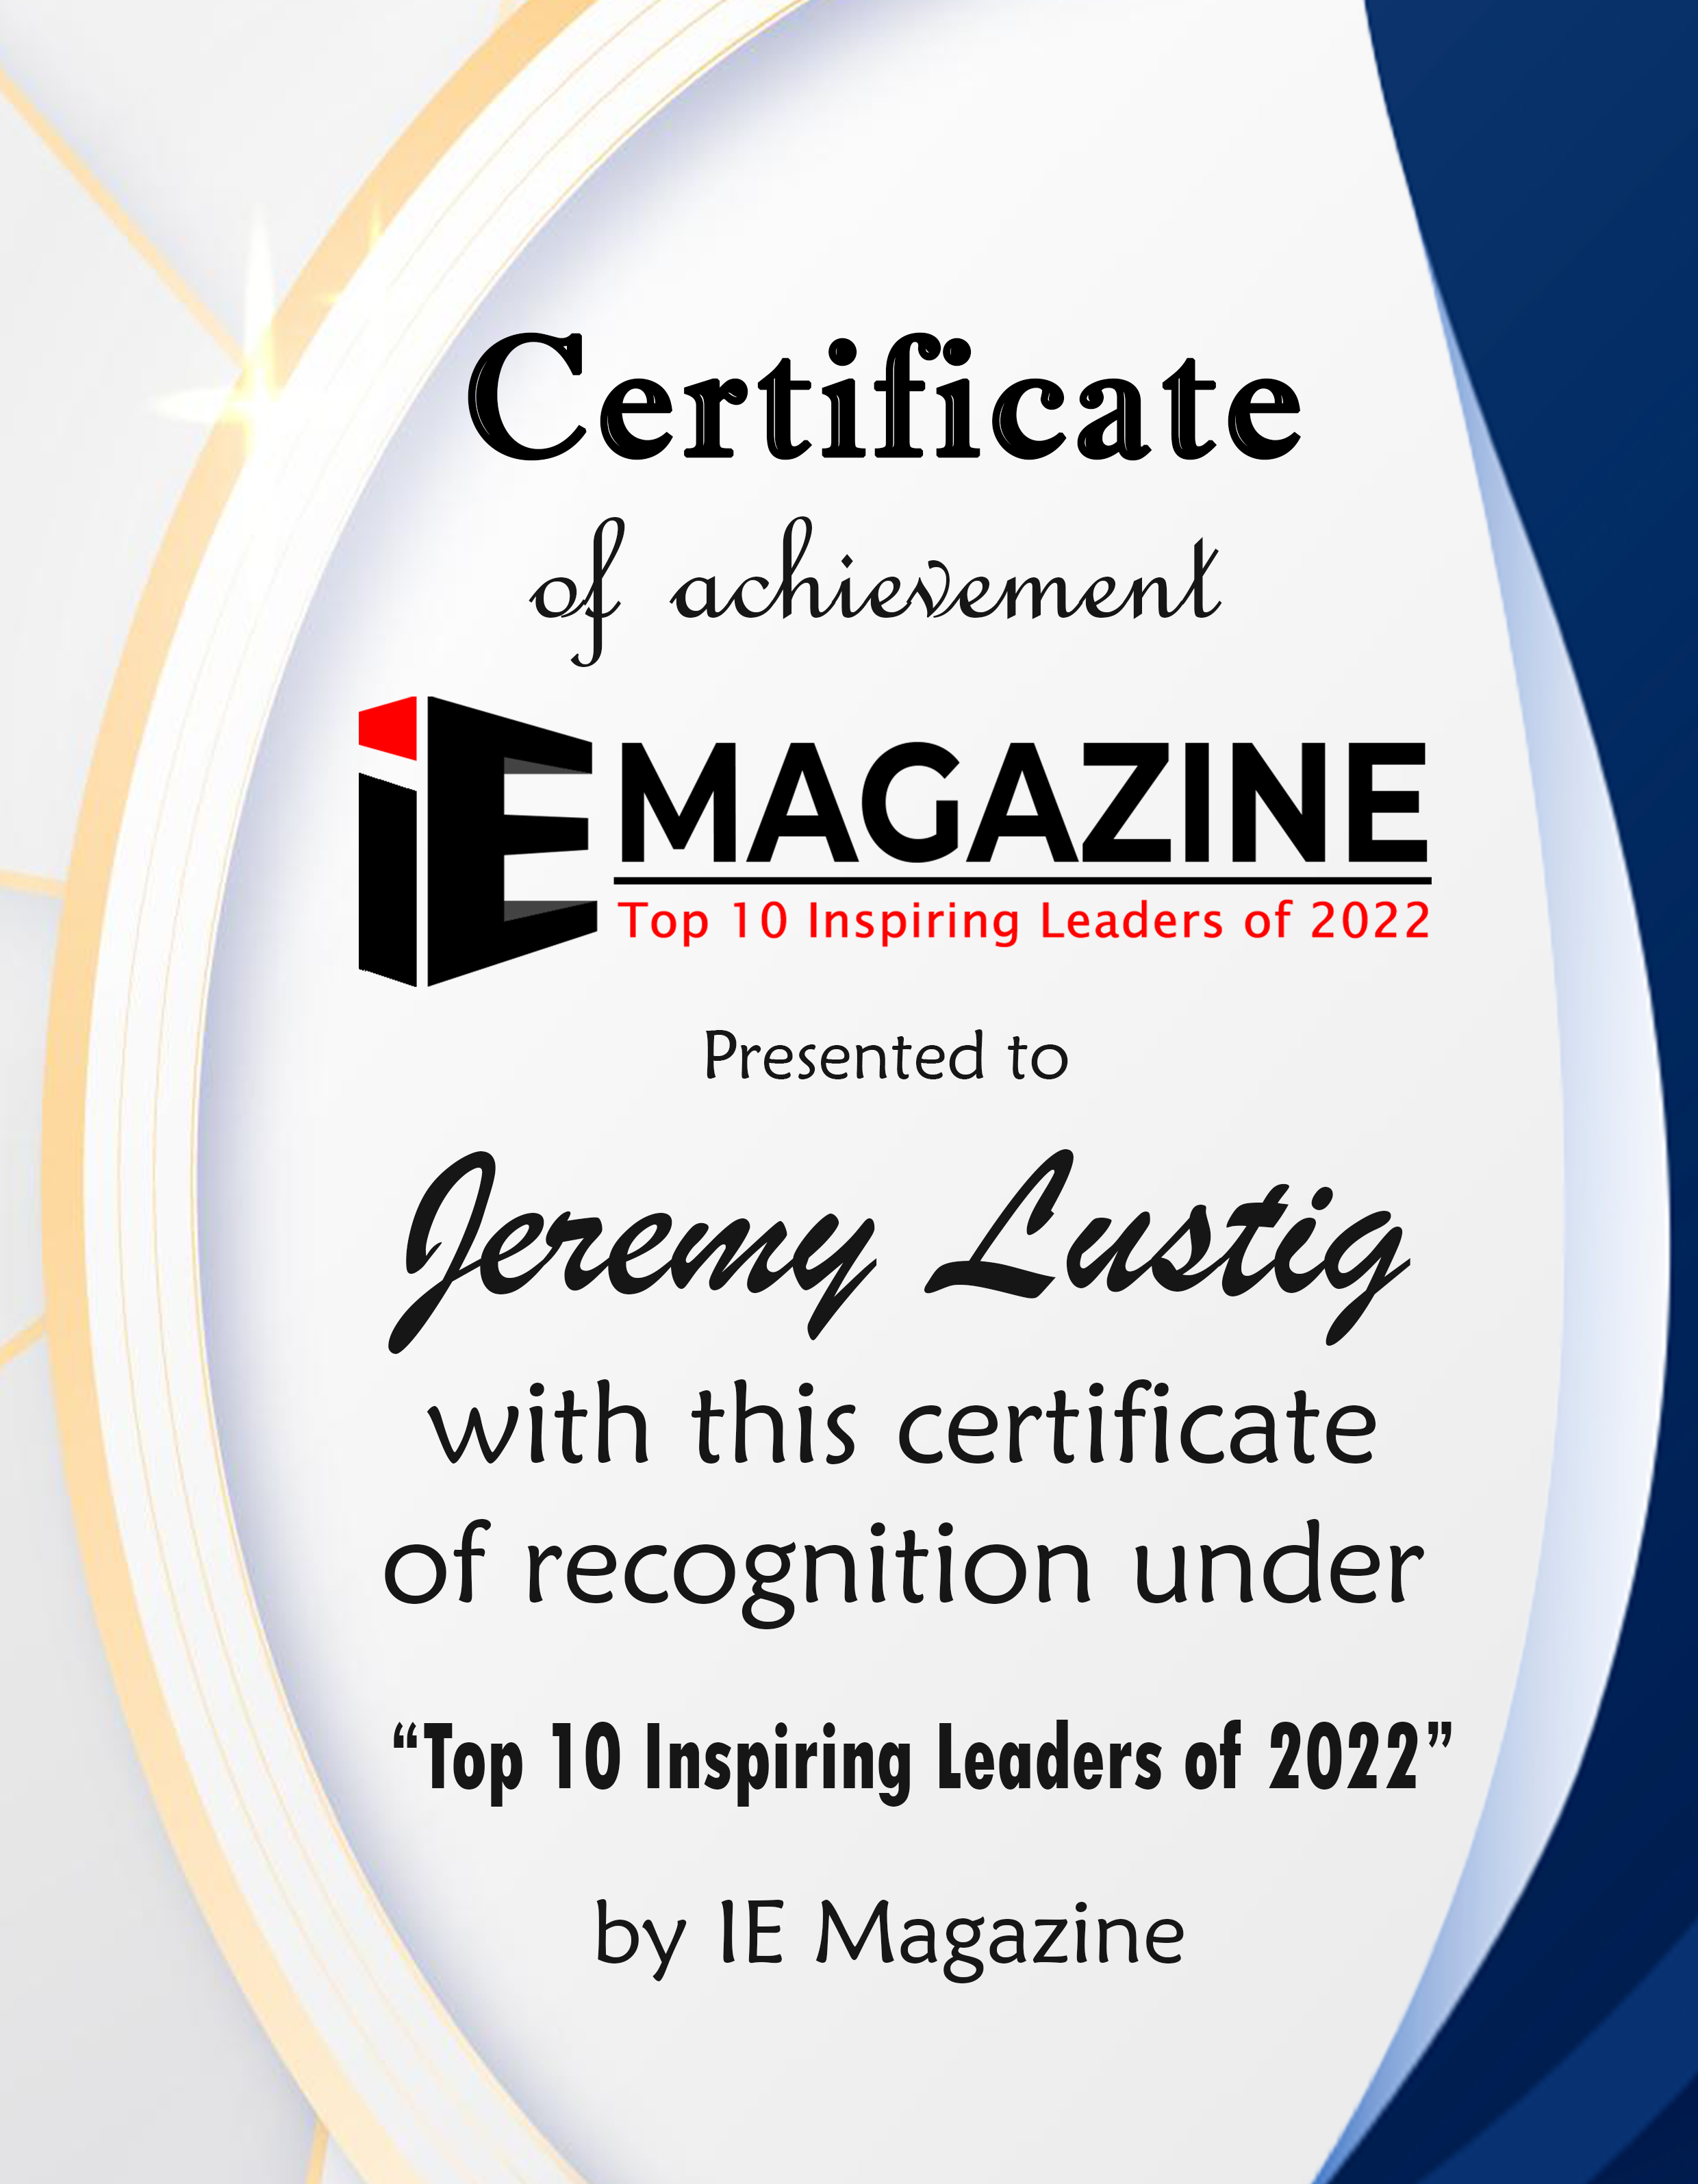 Jeremy Lustig, CEO & President of Five-Point Dental Specialists Certificate